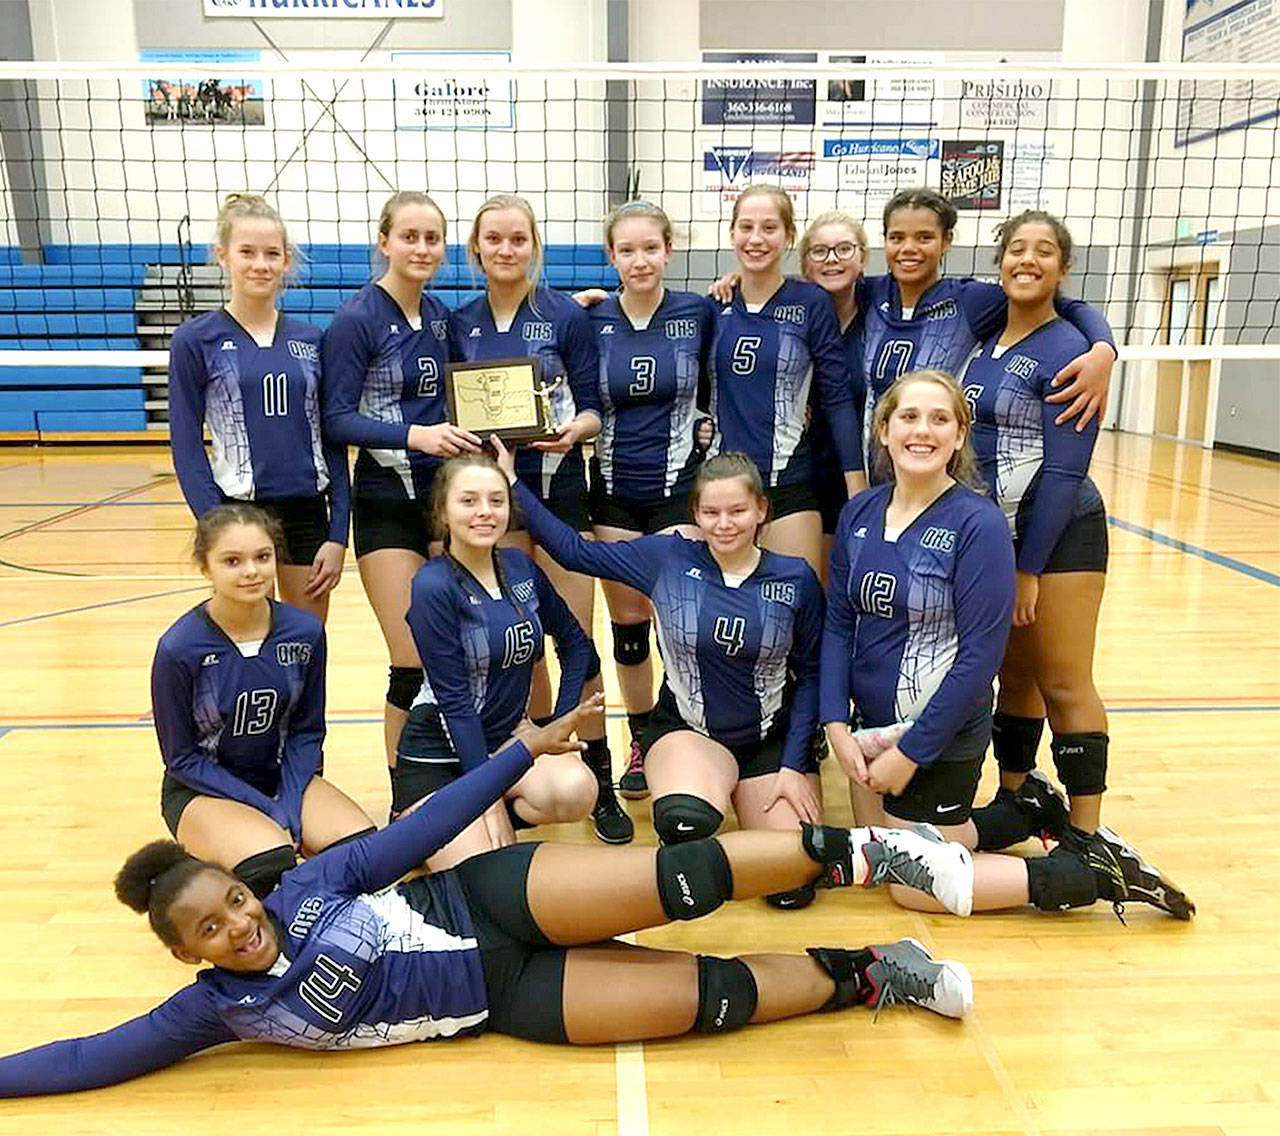 The Quilcene Rangers volleyball squad after winning the 1B Tri-District tournament last week. From left, rear, are Bridget Hitt, Katie Love, Emily Hitt, Abby Weller, McKenzie Kieffer, Natalie Coffey, Gina Brown and Aleina Mitchell. From left, front, are Shelby Love, Pearl Munn, Sydney Brown and Marissa Kieffer. On the floor is Allanah Carron.